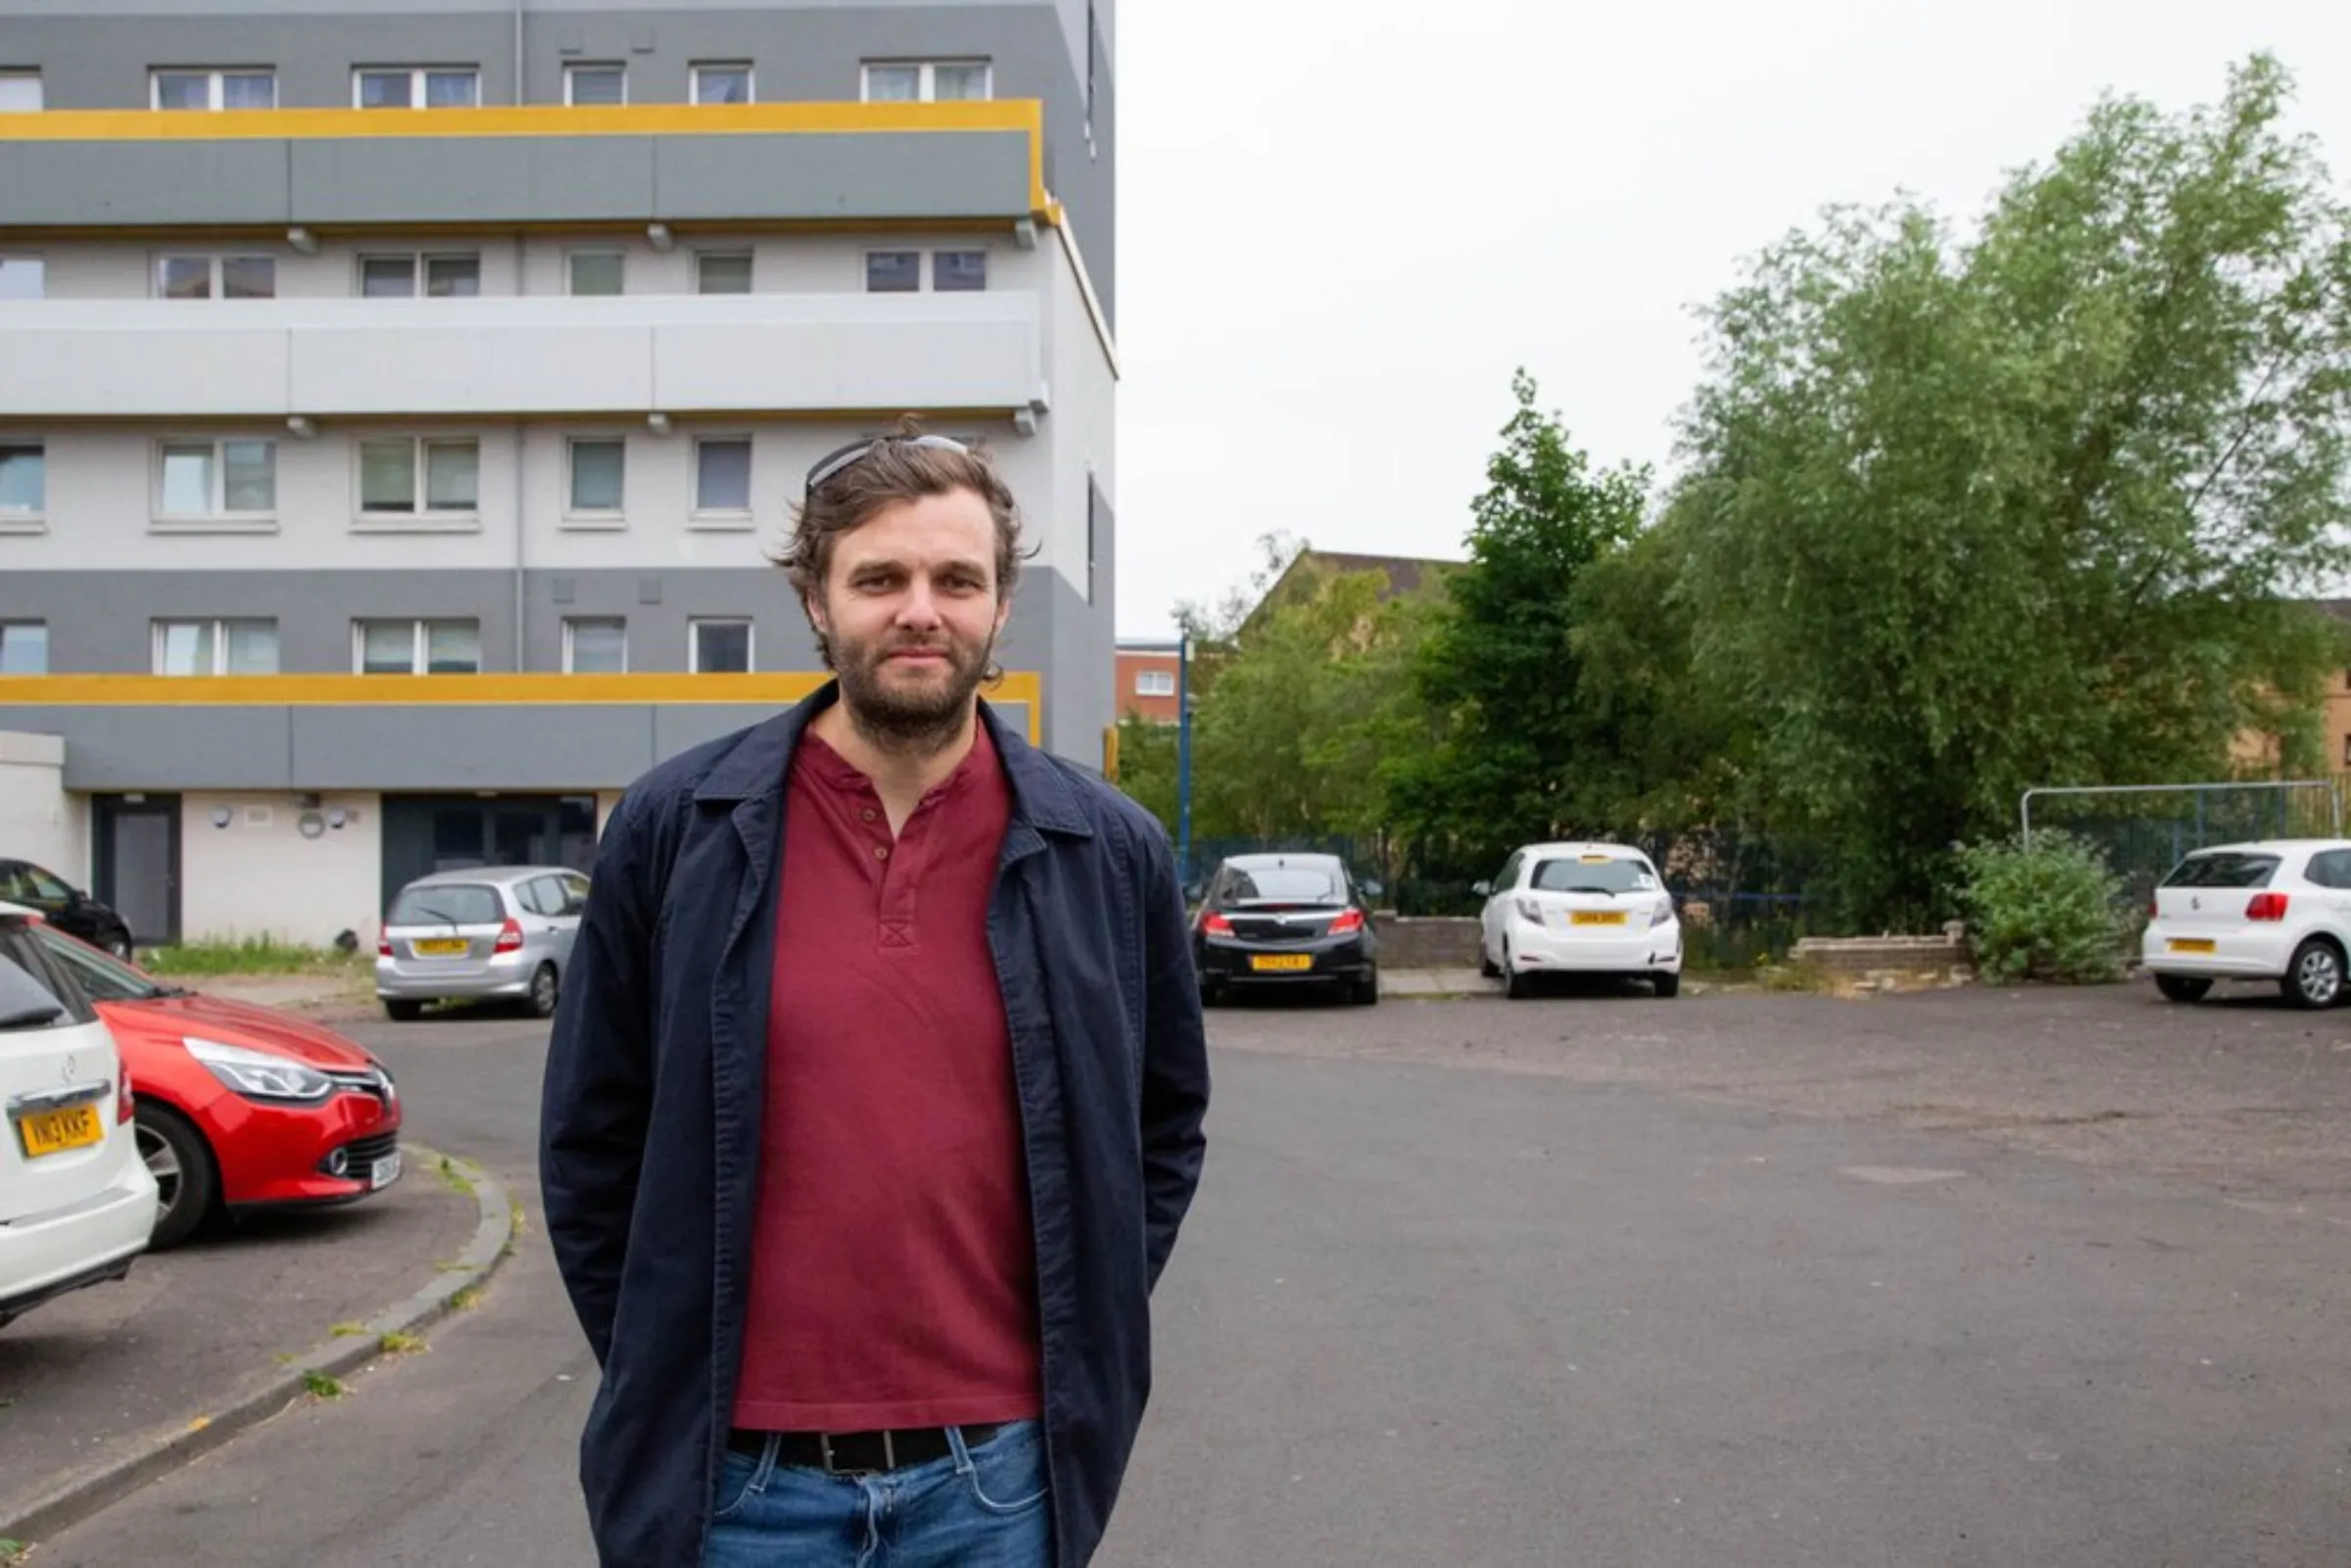 Architect Rupert Daly stands outside renovated Queens Cross Housing Association homes in Glasgow, United Kingdom, July 23, 2021. Daly said investing in high-quality green building improvements can work out cheaper in the long run as regulations on energy efficiency step up